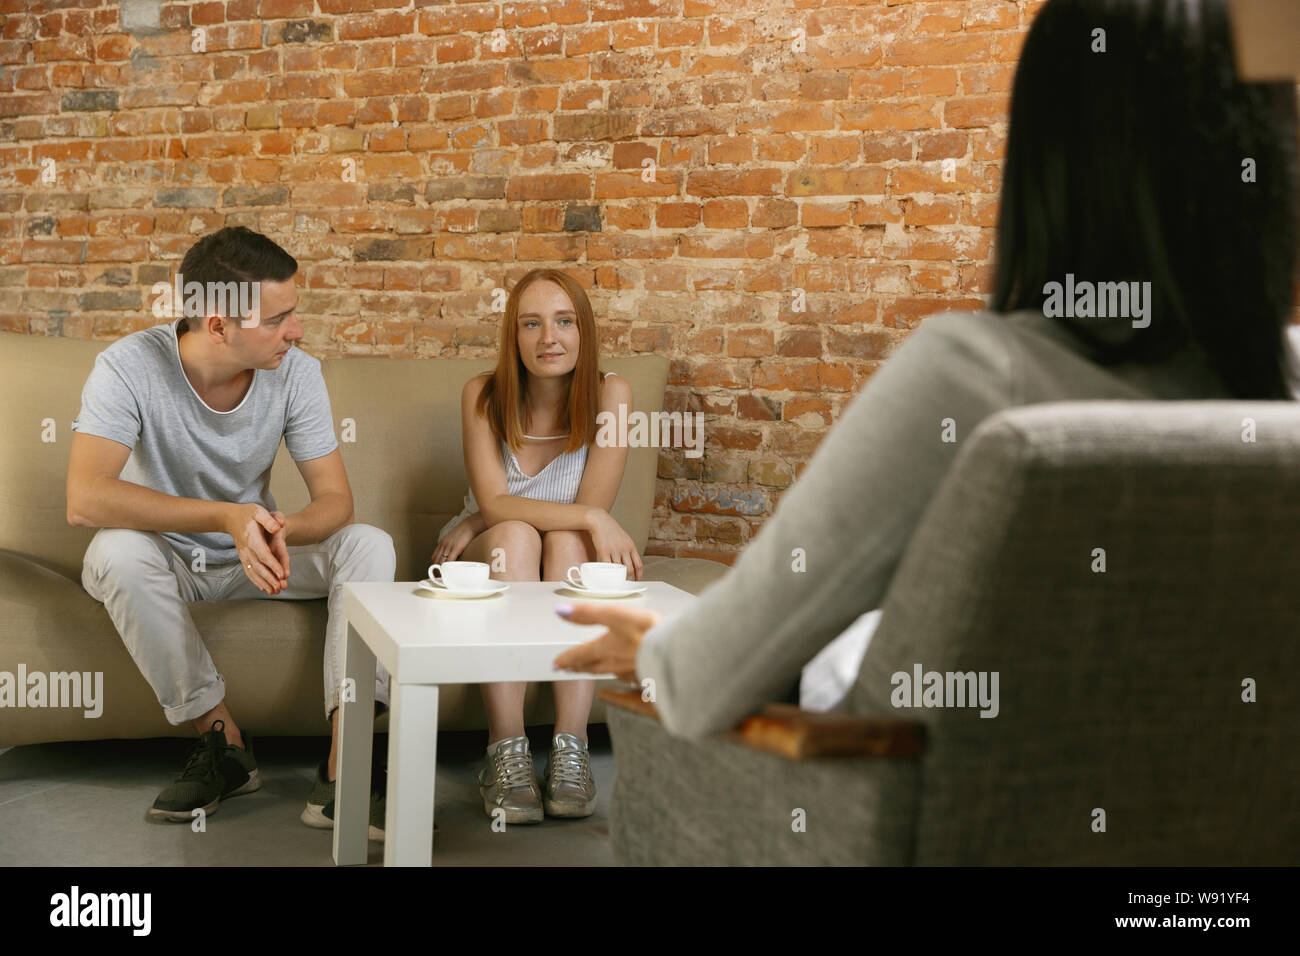 Couple in therapy or marriage counseling. Psychologist, counselor, therapist or relationship consultant giving advice. Man and woman sitting on a psychotherapy session. Family, mental health concept. Stock Photo